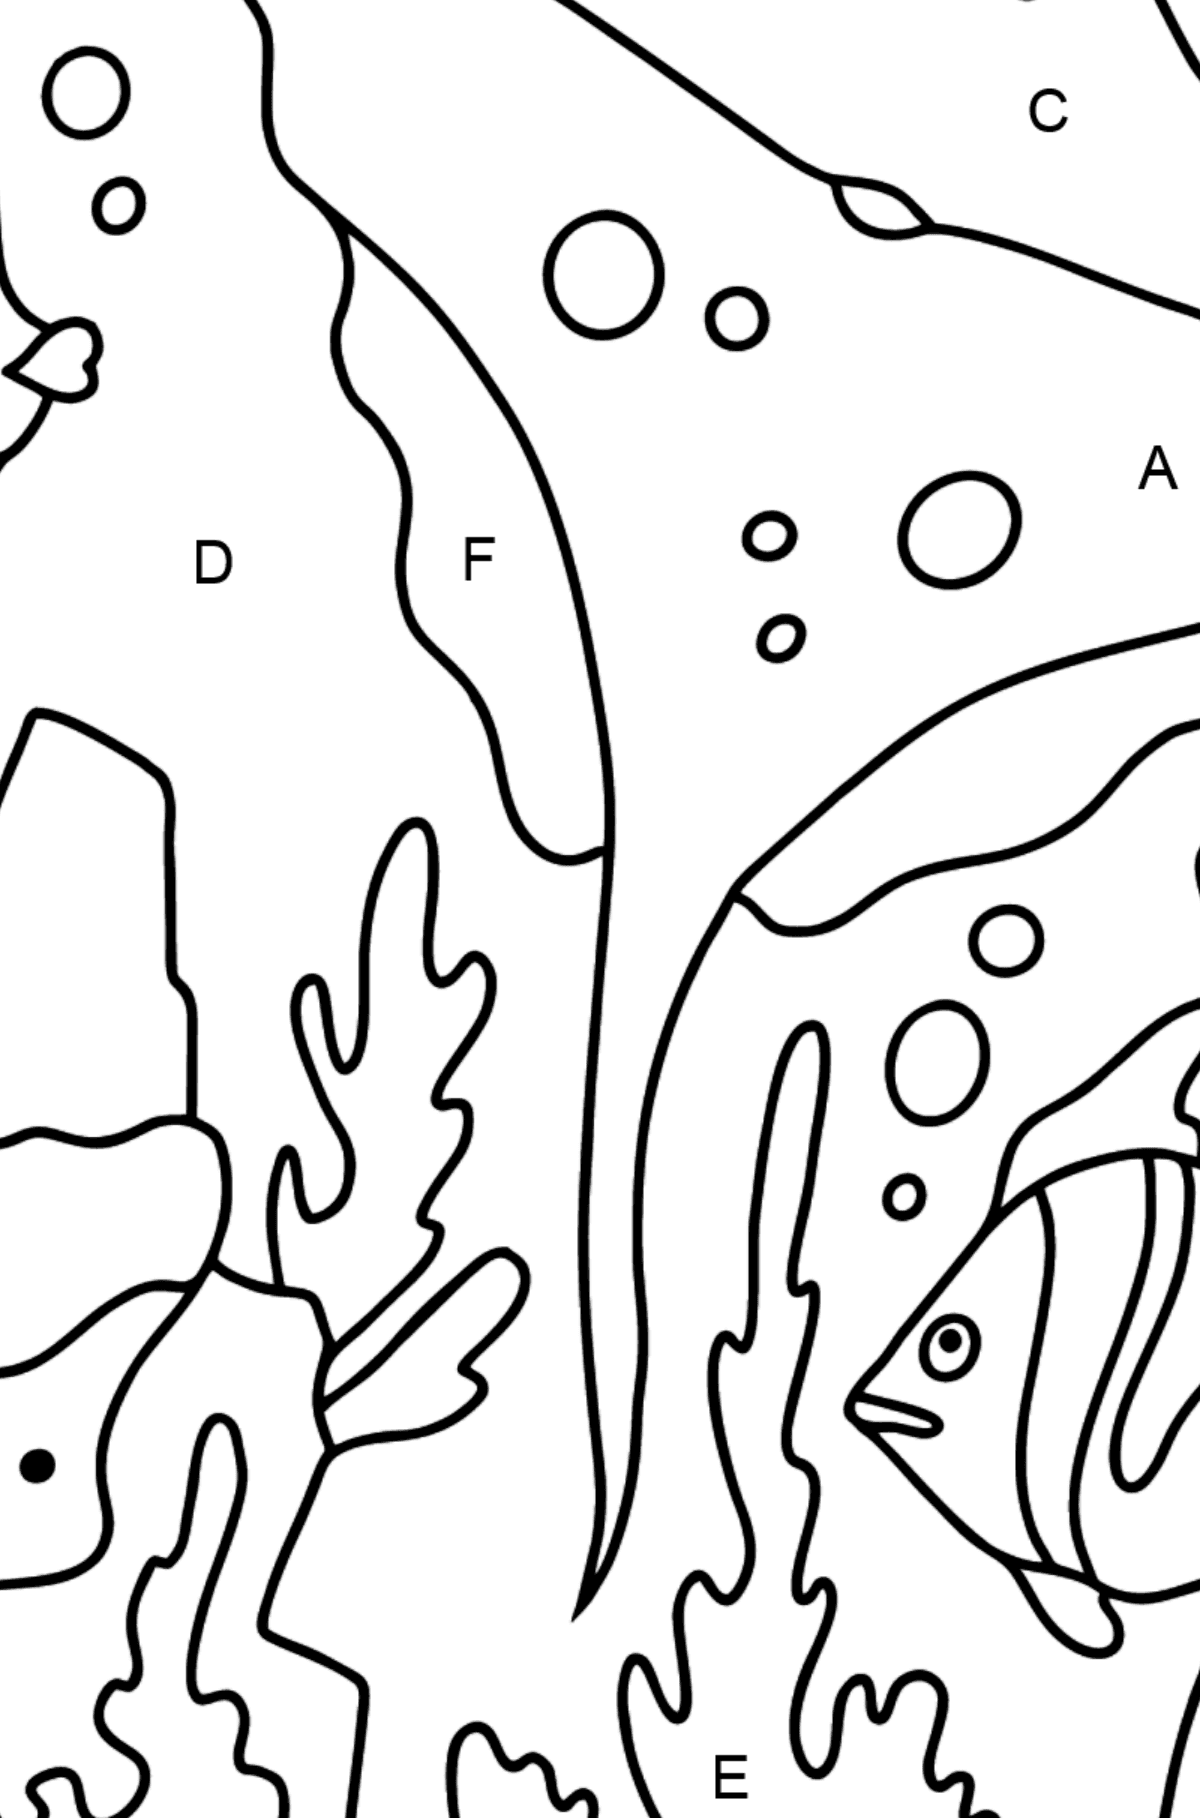 Coloring Page - Fish are Playing with a Charming Stingray - Coloring by Letters for Kids